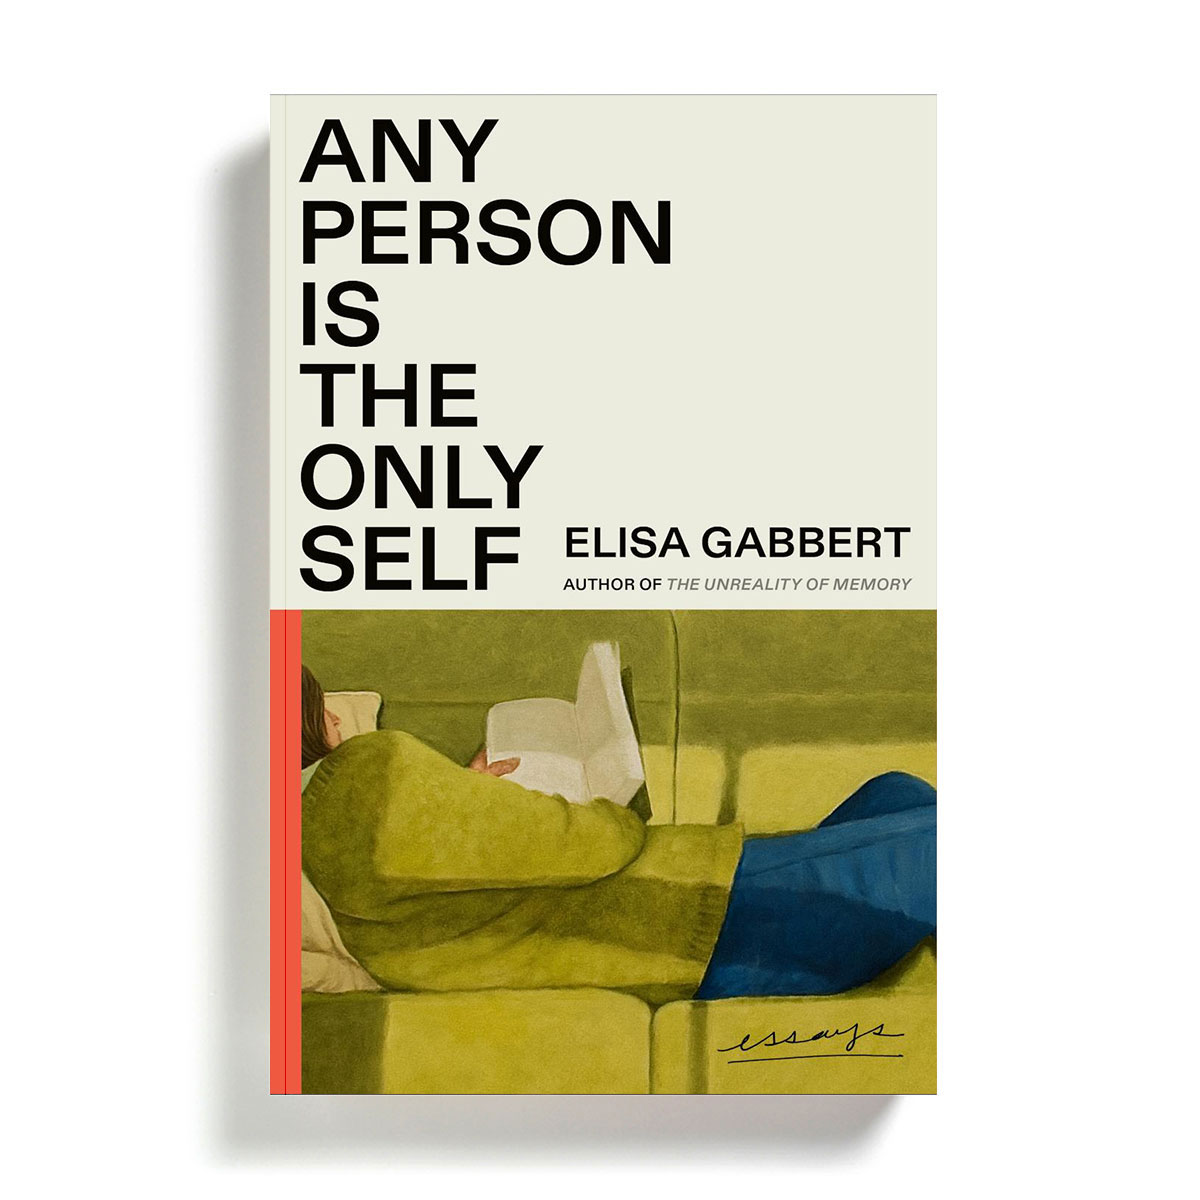 Coming this June! ANY PERSON IS THE ONLY SELF is a book of contagiously curious essays on reading, art, and the life of the mind. In sixteen dazzling essays, @egabbert explores a life lived alongside books of all kinds. Preorder now for 6/11! bit.ly/42jKpjK